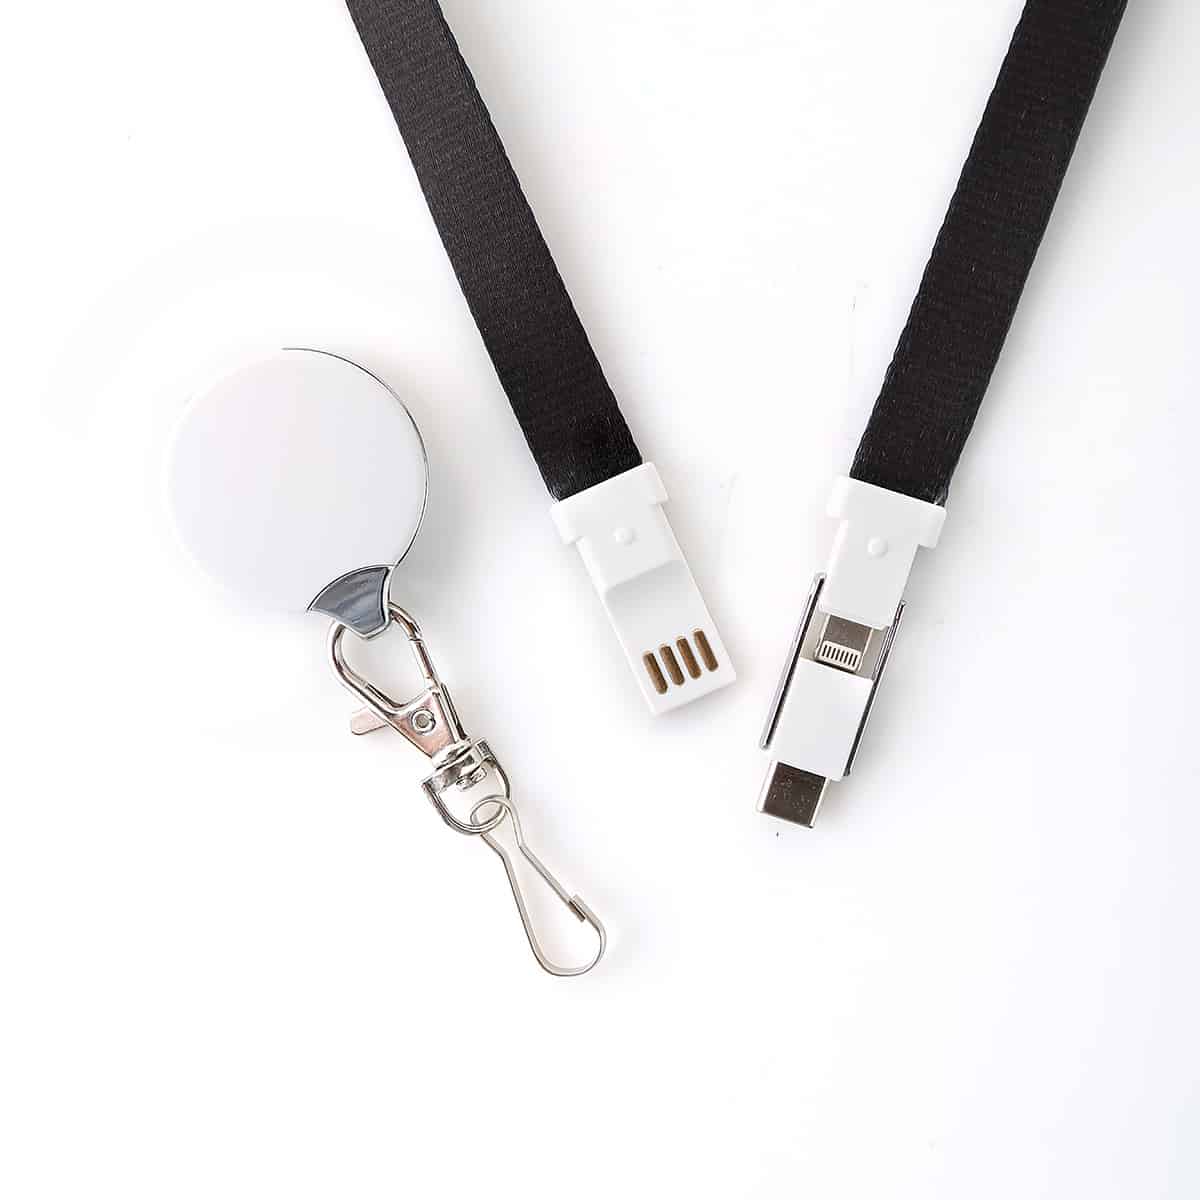 3 IN 1 FAST CHARGE LANYARD CABLE